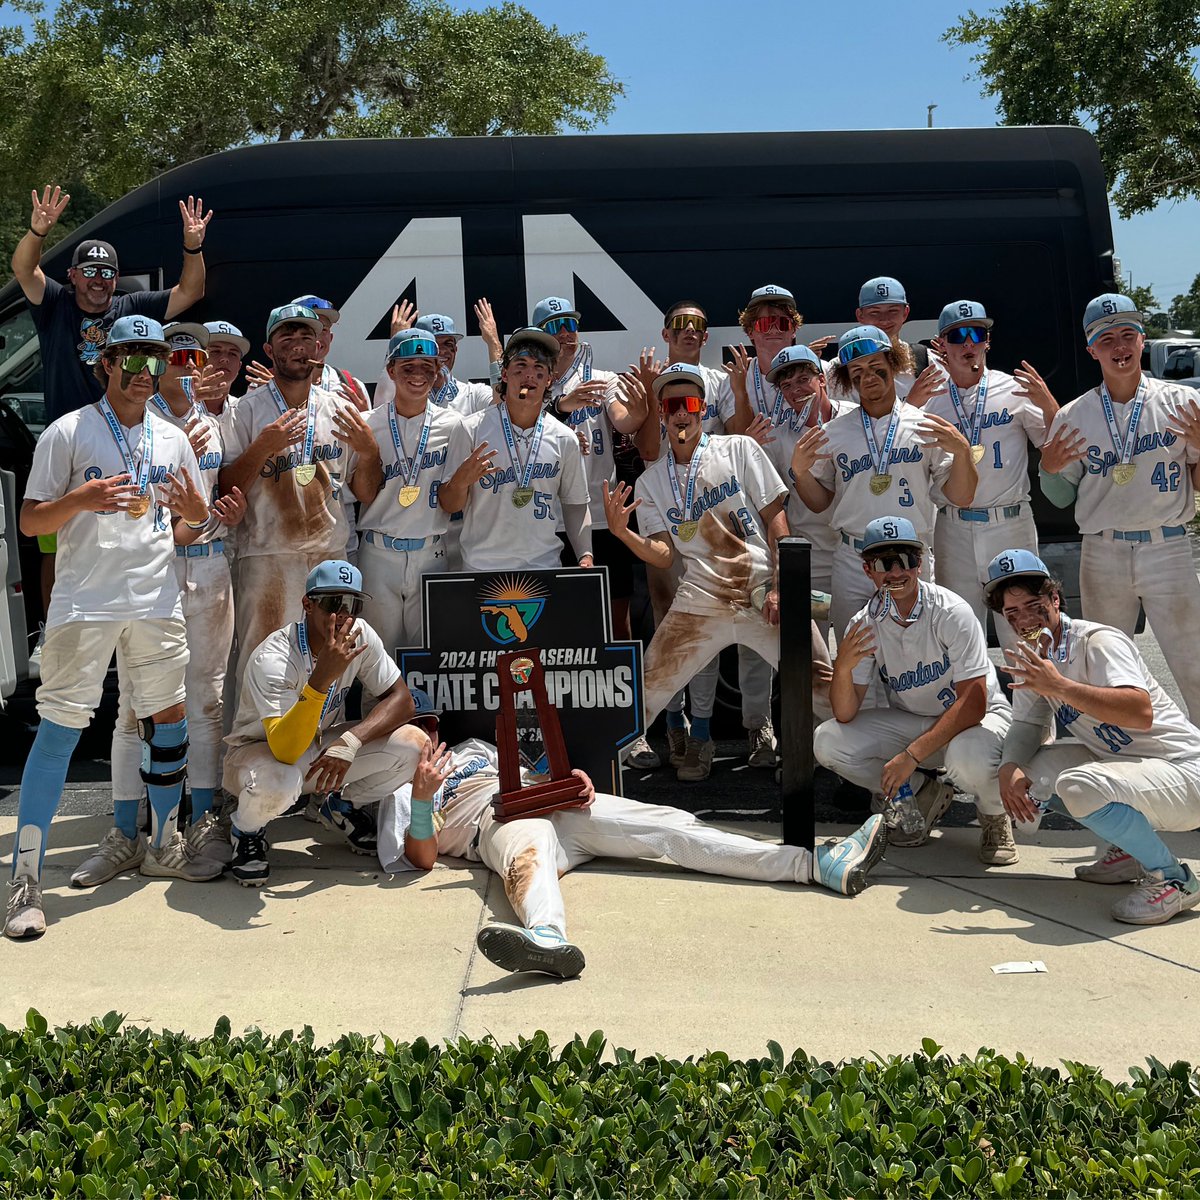 Congratulations to the 2024 H.S. State Champs and 44 Pro elite partner school @SJCDbaseball in Jacksonville FL. We told you 44 Pro bats are 🥵!